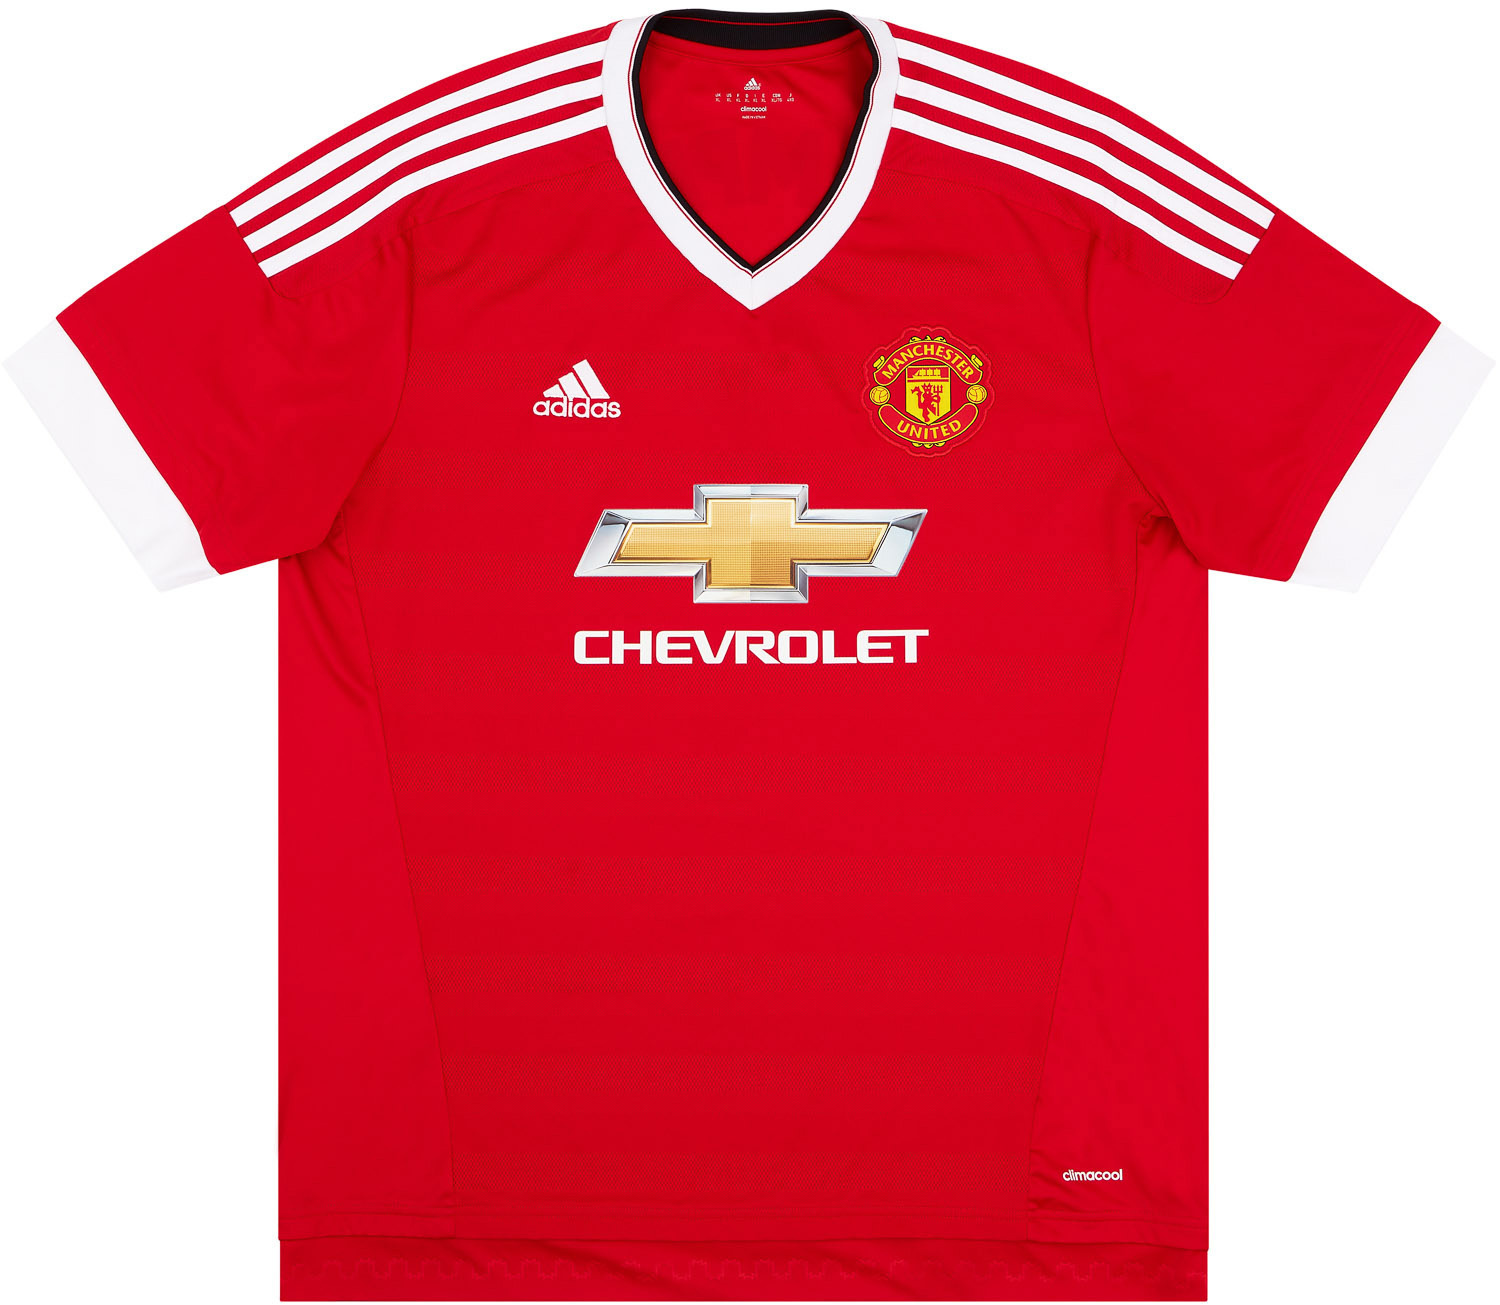 2015-16 Manchester United Home Shirt - 8/10 -